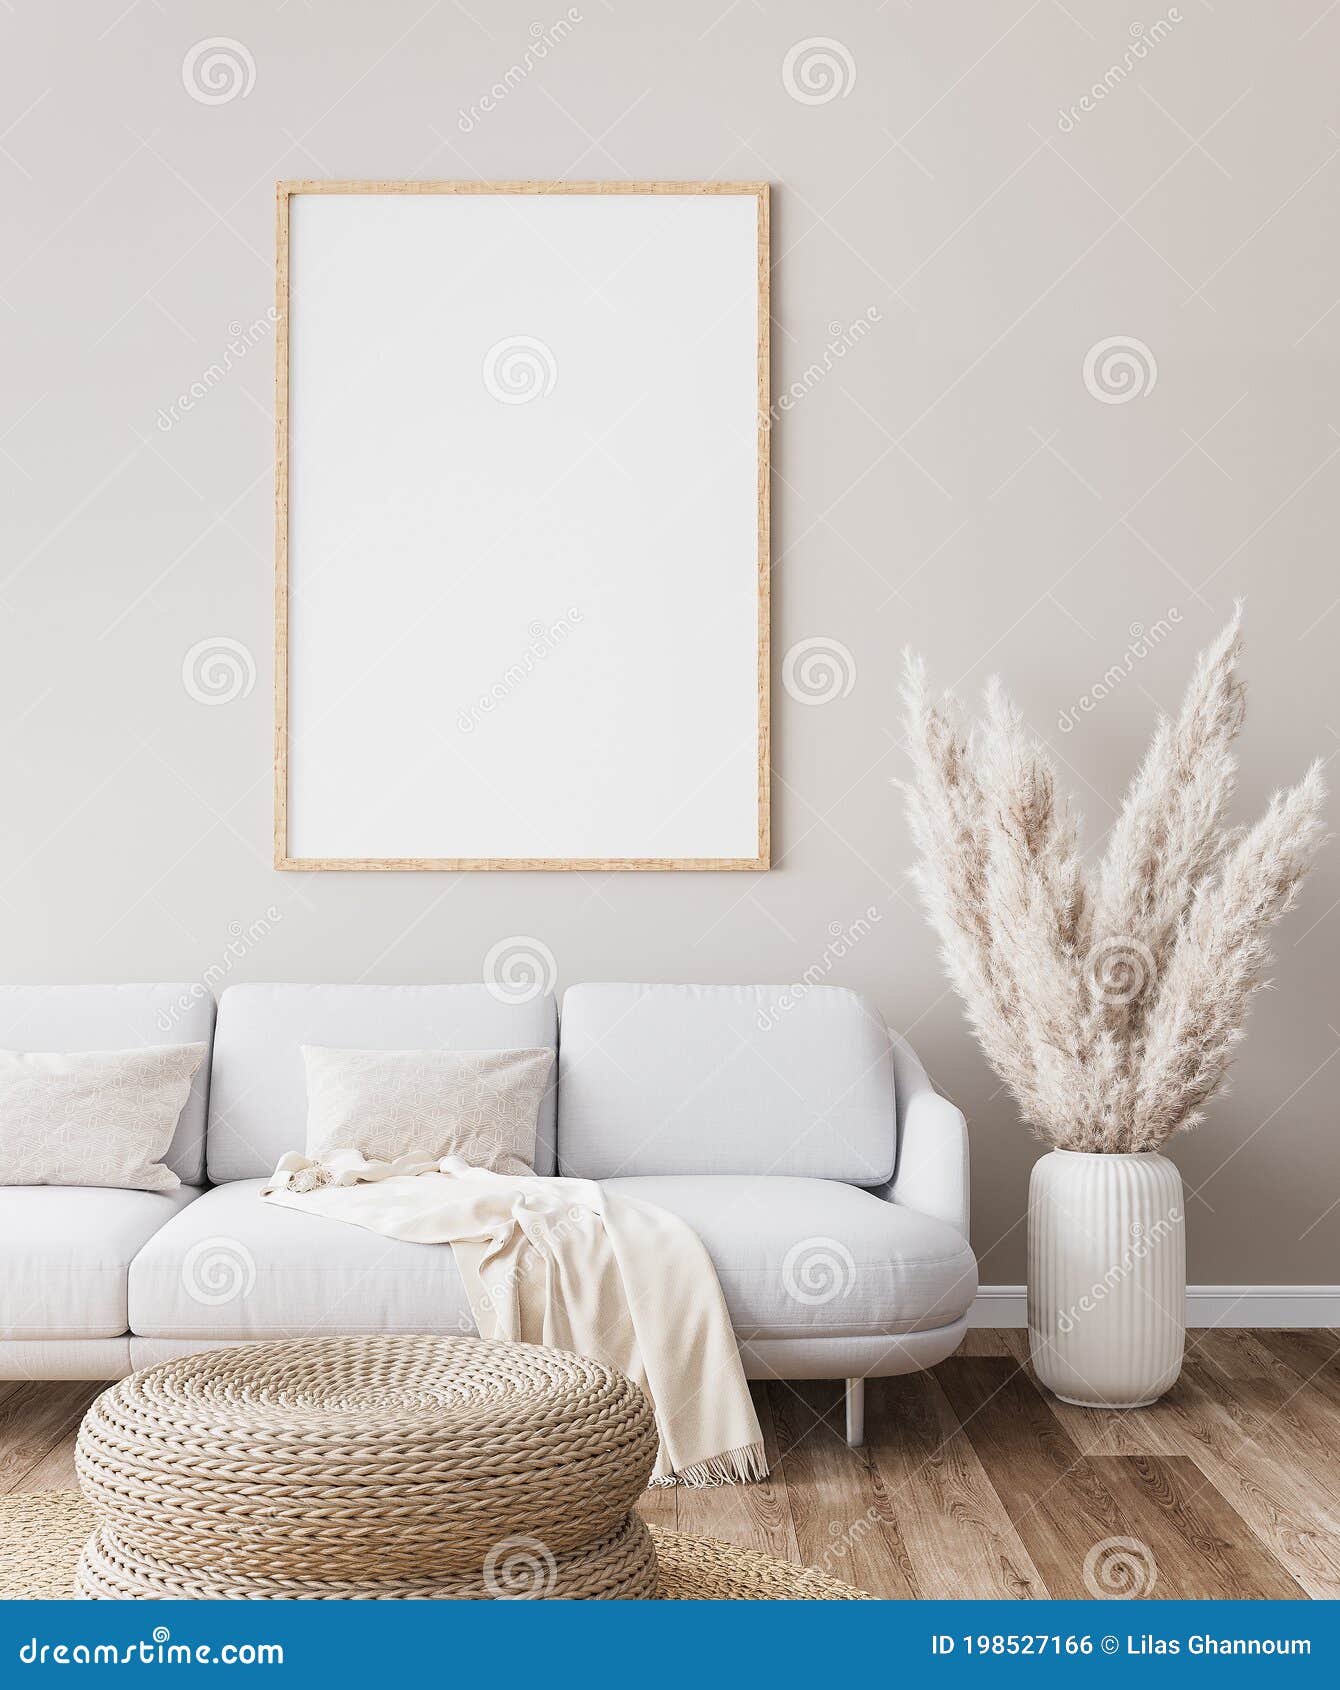 Frame Mockup in Farmhouse Living Room Design, White Furniture on Bright  Wall Background Stock Photo - Image of farmhouse, interior: 198527166